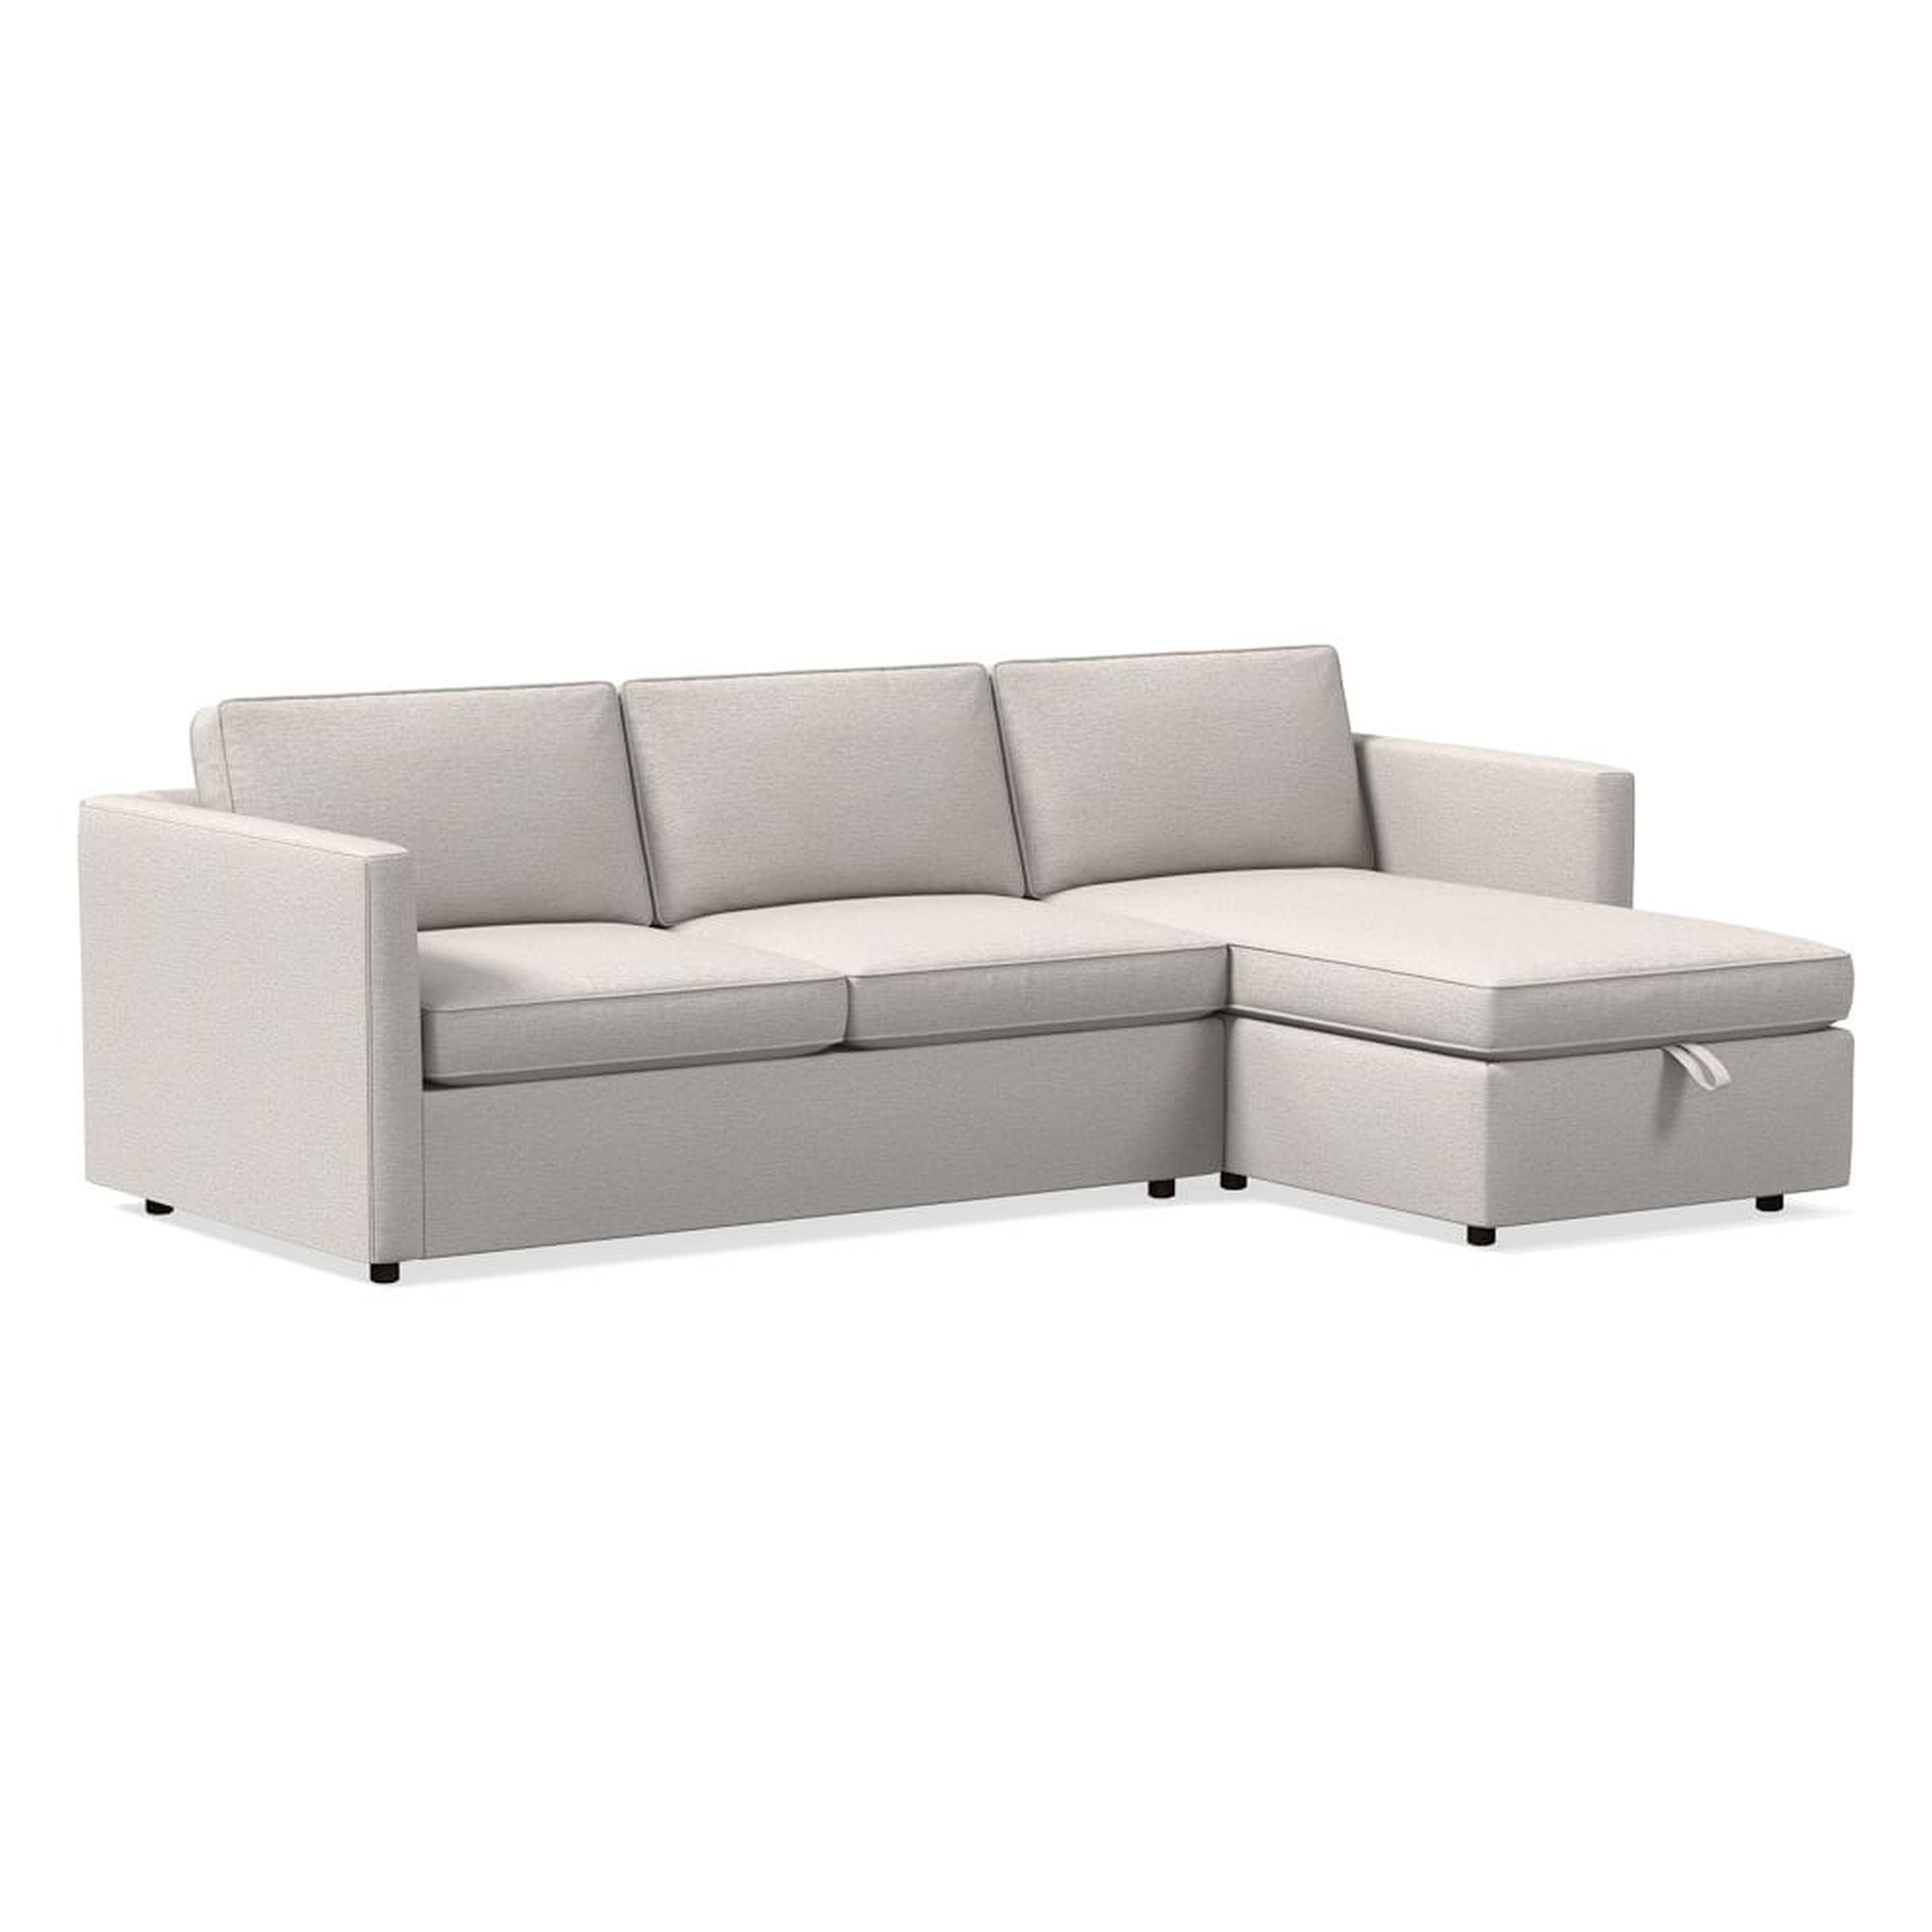 Harris Sectional Set 05: LA 65" Sofa, RA Storage Chaise, Poly , Twill, Sand, Concealed Supports - West Elm